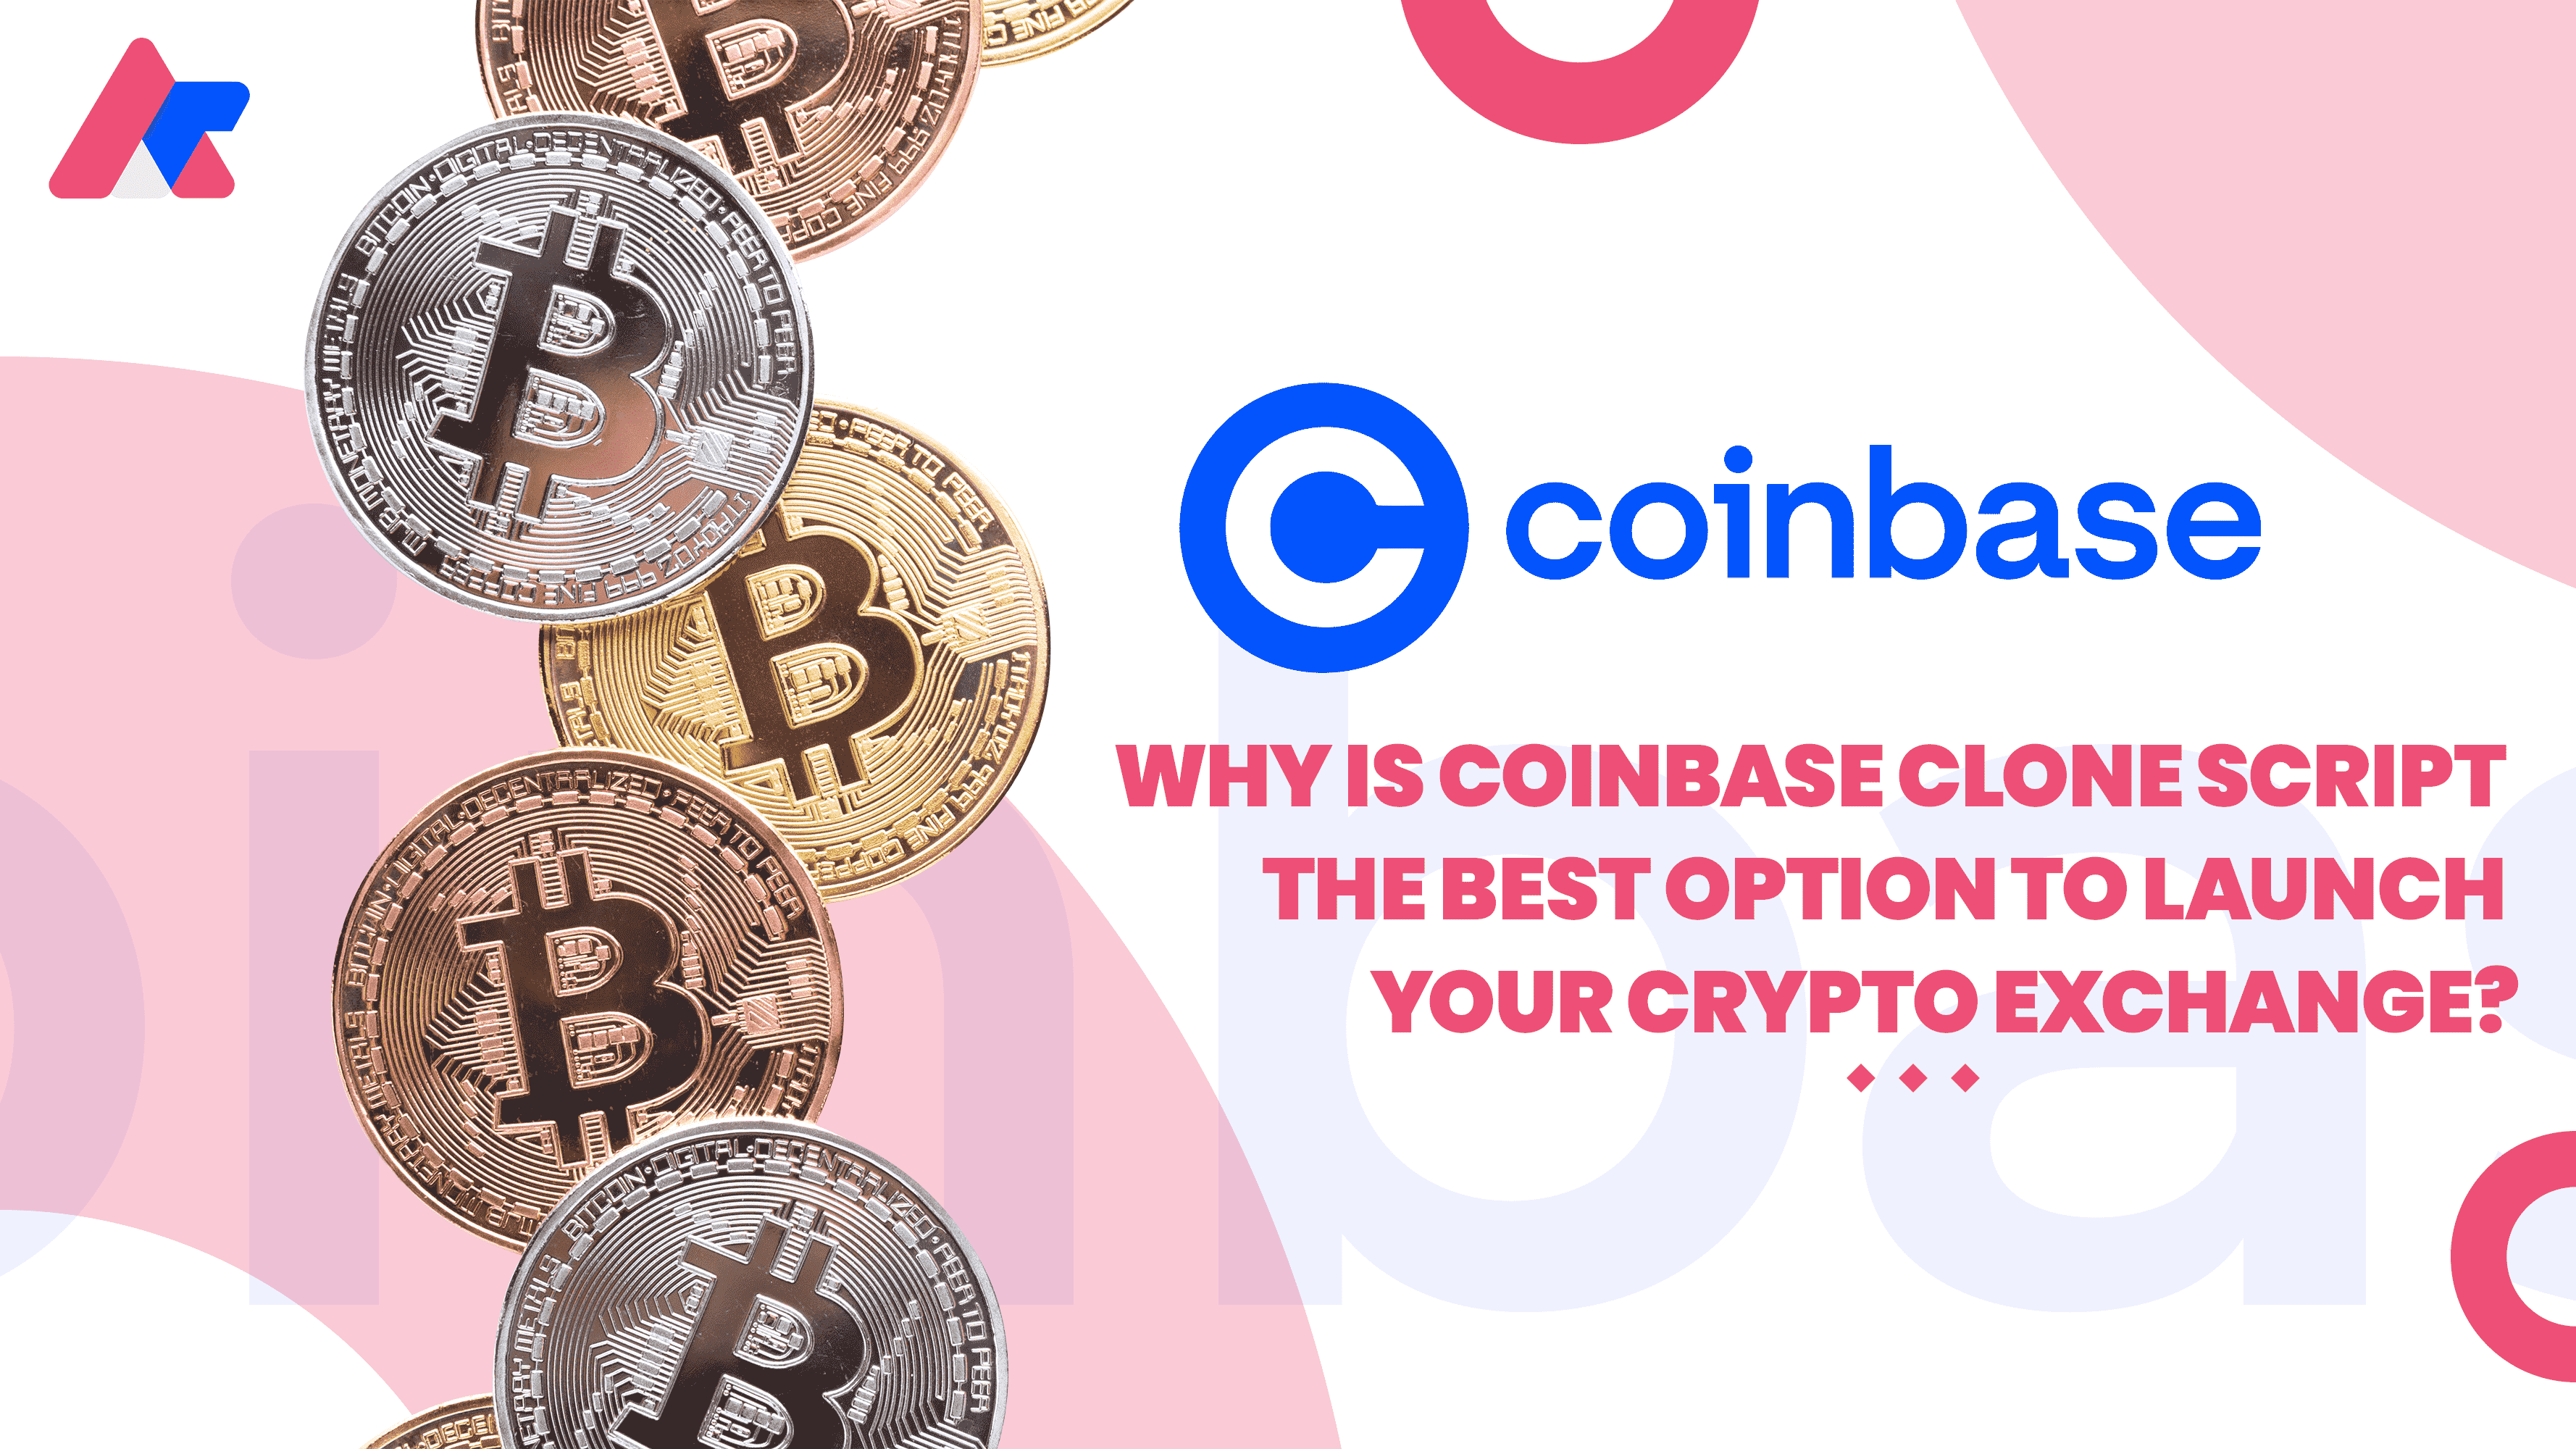 Why Coinbase clone script is the best option to launch your crypto exchange